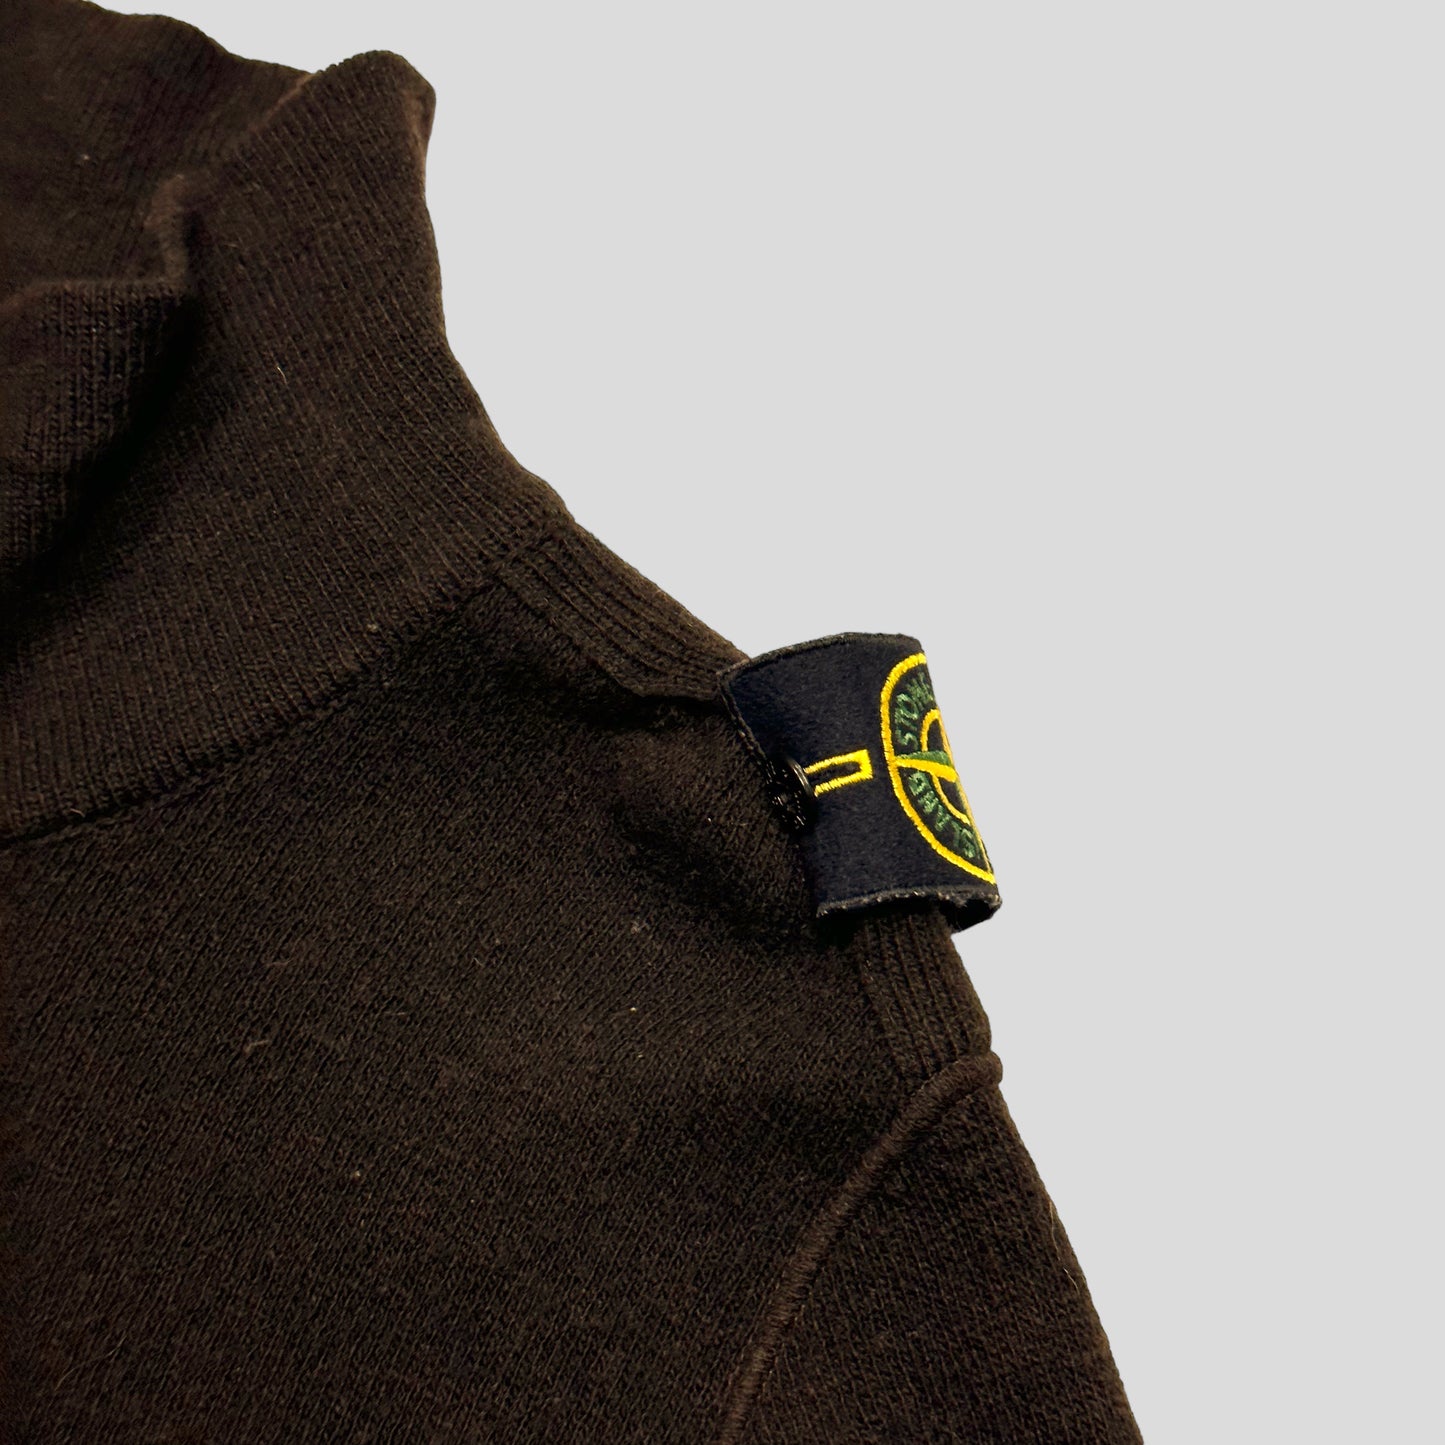 Stone Island AW06 Shoulder Badge Knitted Cardigan - M